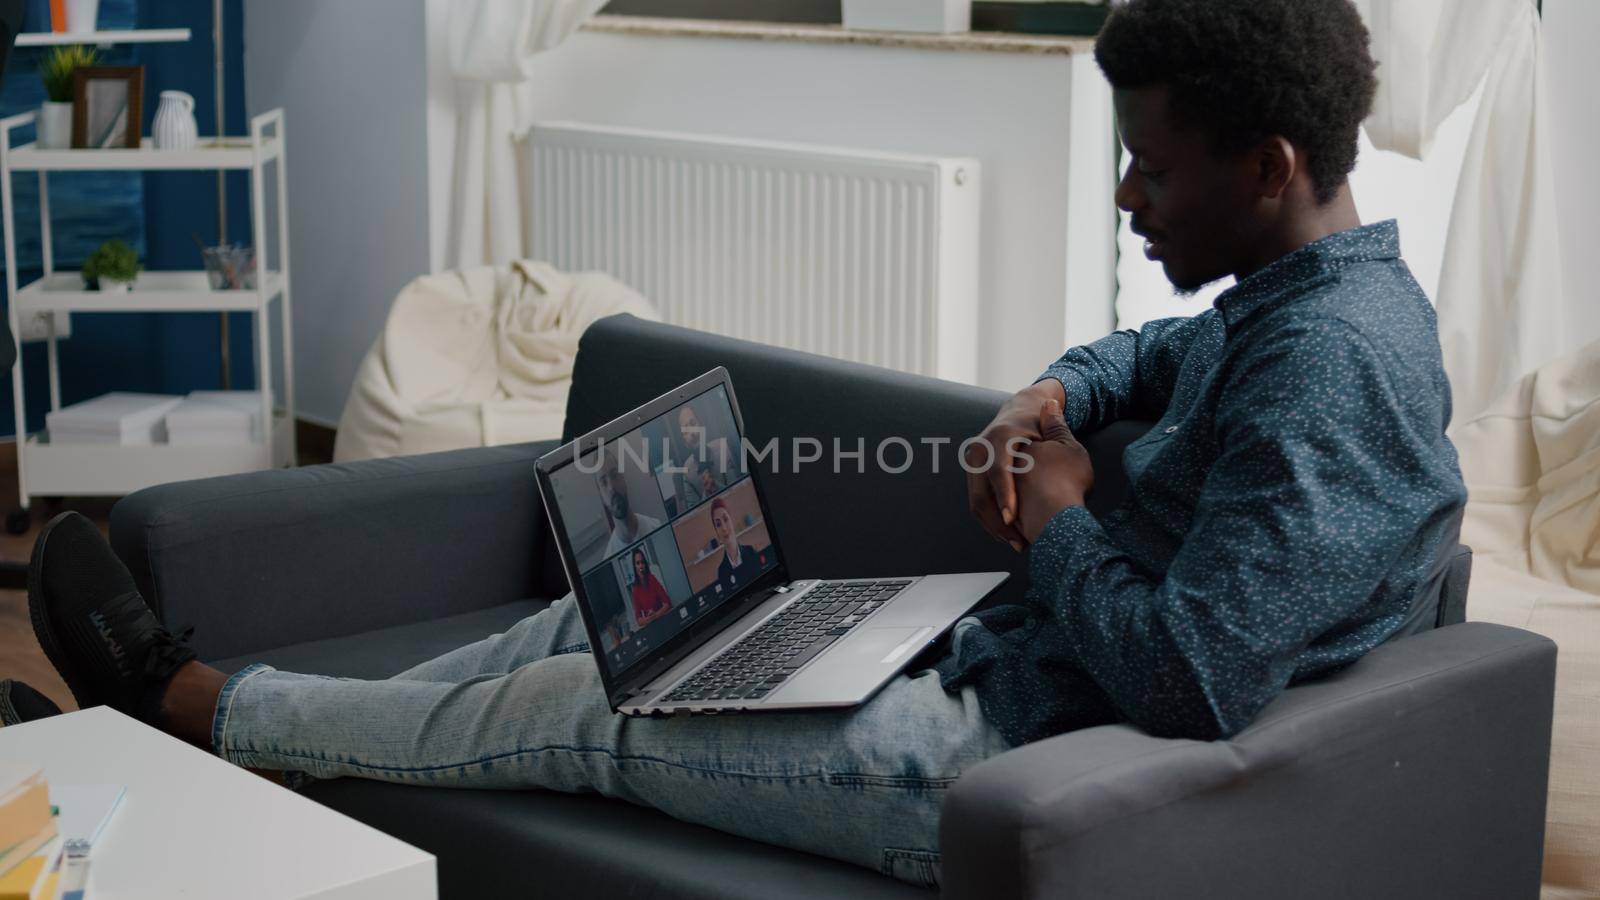 African american ethnicity man using online conference webcam communication to connect via internet with coworkers while working from home. Black man remote worker chatting, communication video call